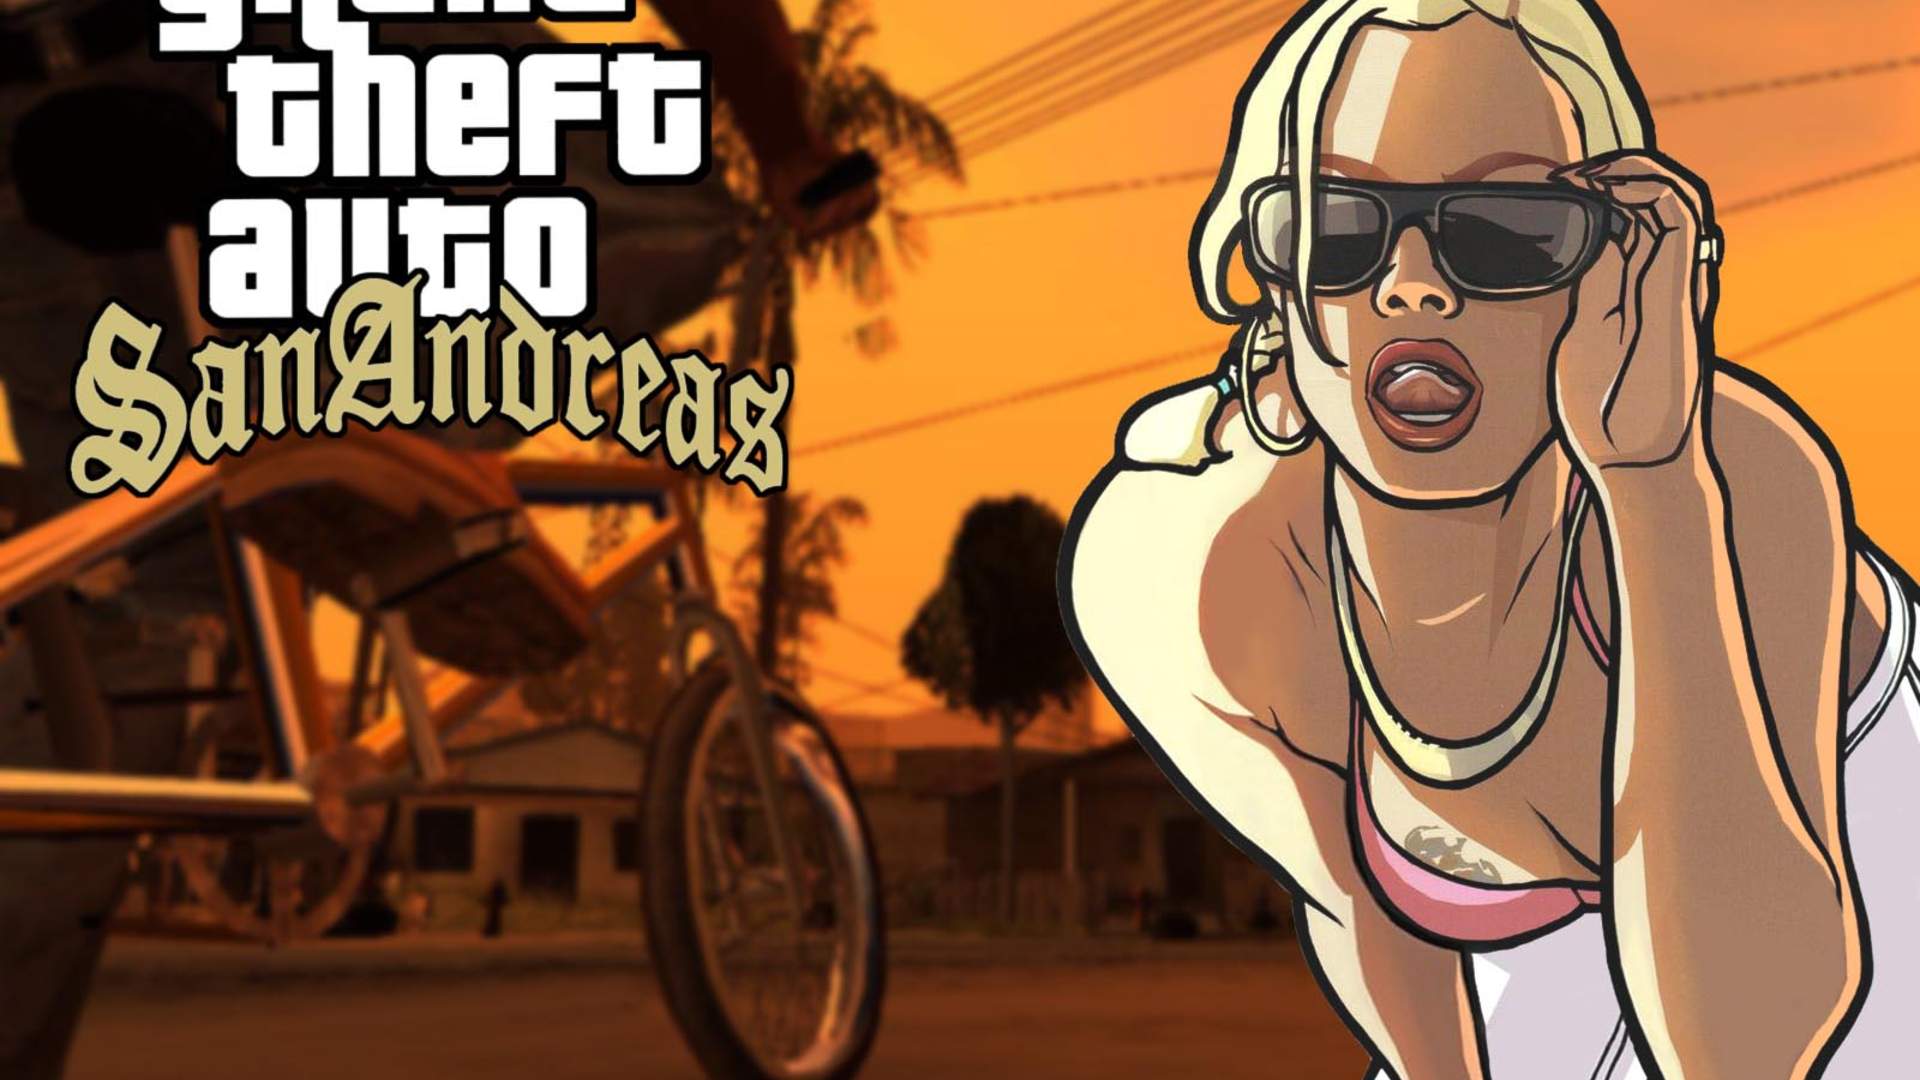 See the Moments of GTA that Shouldn't Be Seen by Parents